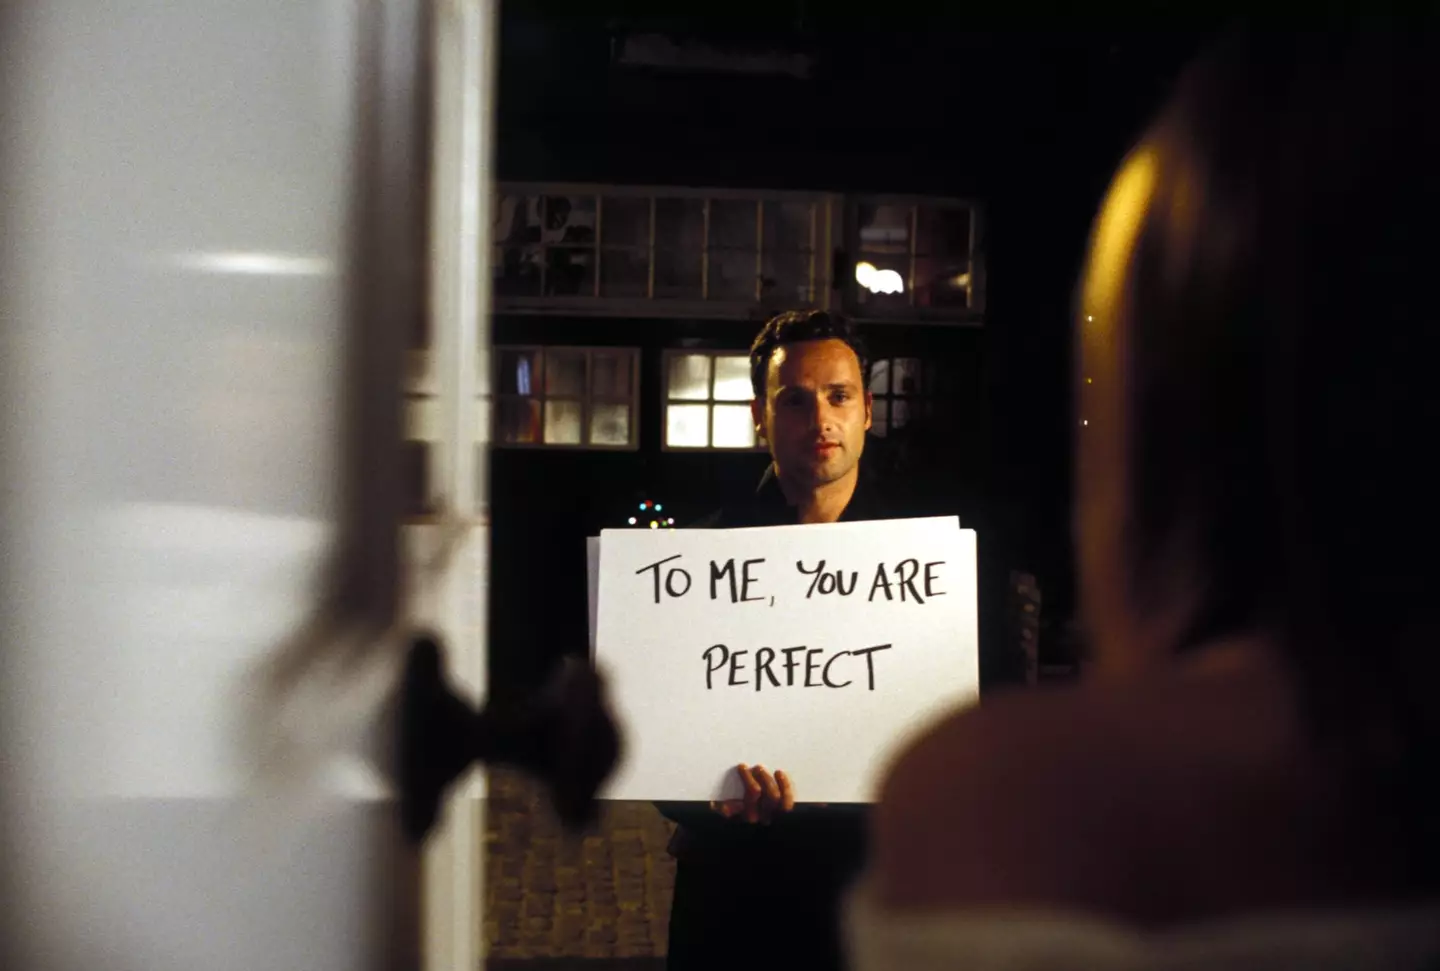 Love Actually is a timeless classic... though this scene hasn't aged awfully well.